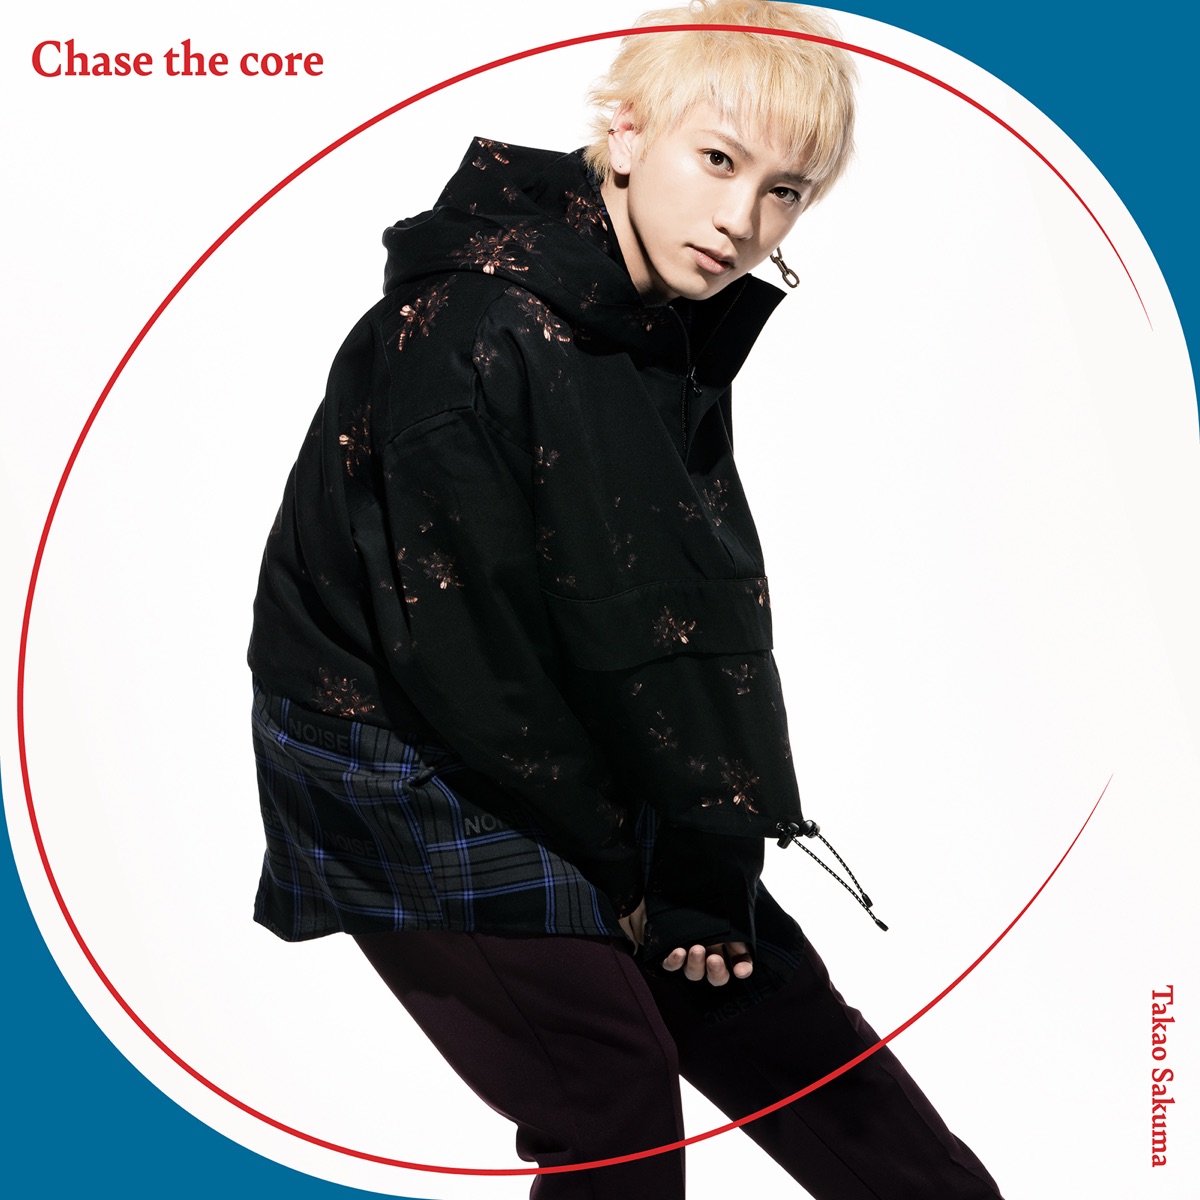 Cover art for『Takao Sakuma - Chase the core』from the release『Chase the core